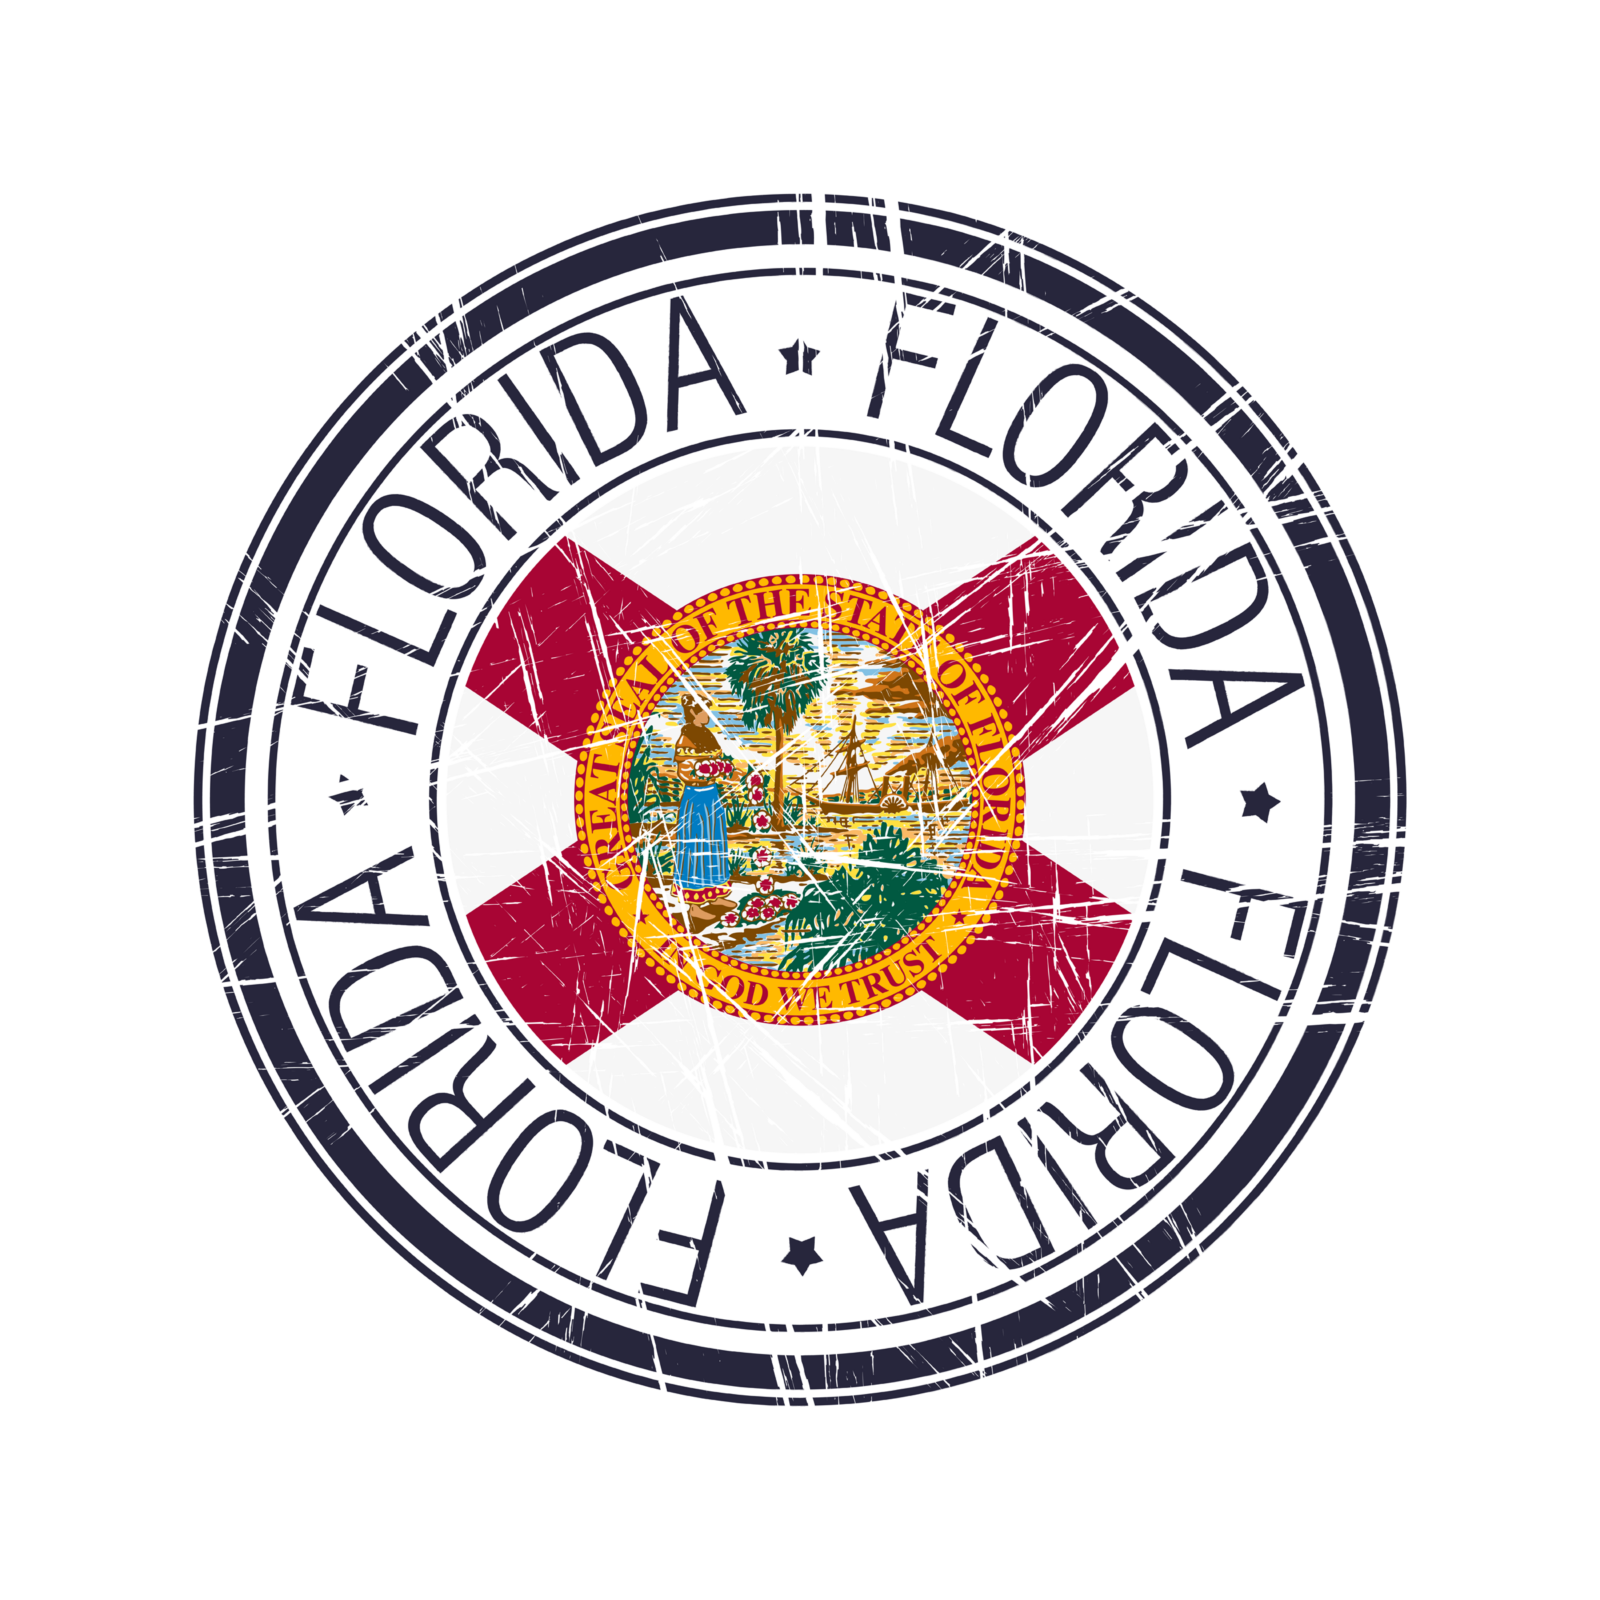 Florida round. Штамп штата Флорида. Great Seal of the State of Florida.